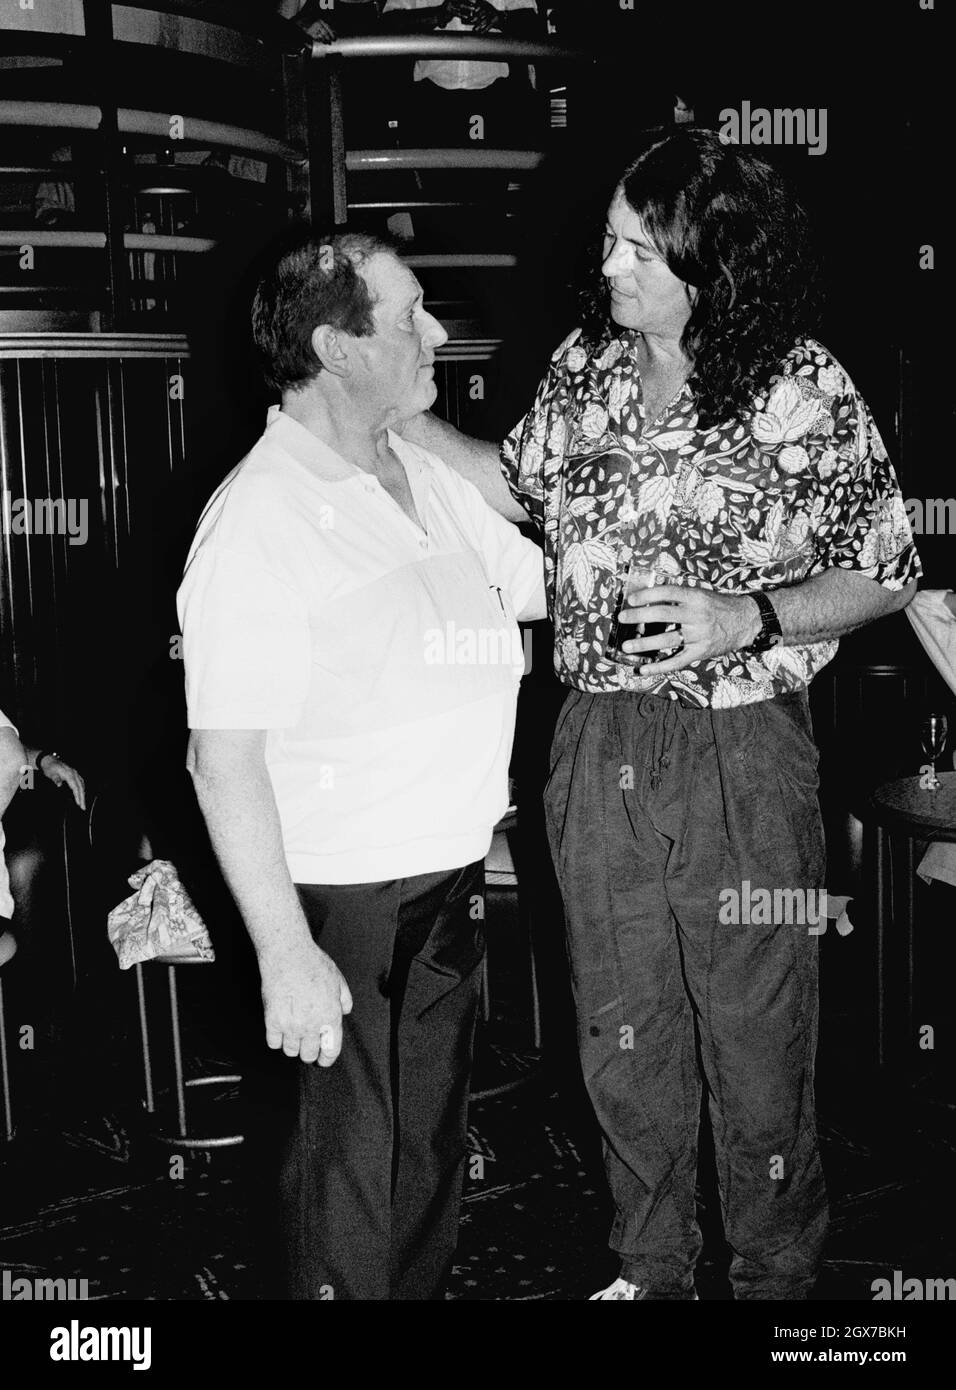 Jim Marshall, OBE with singer Ian Gillan at a private function in London, 1988. Stock Photo